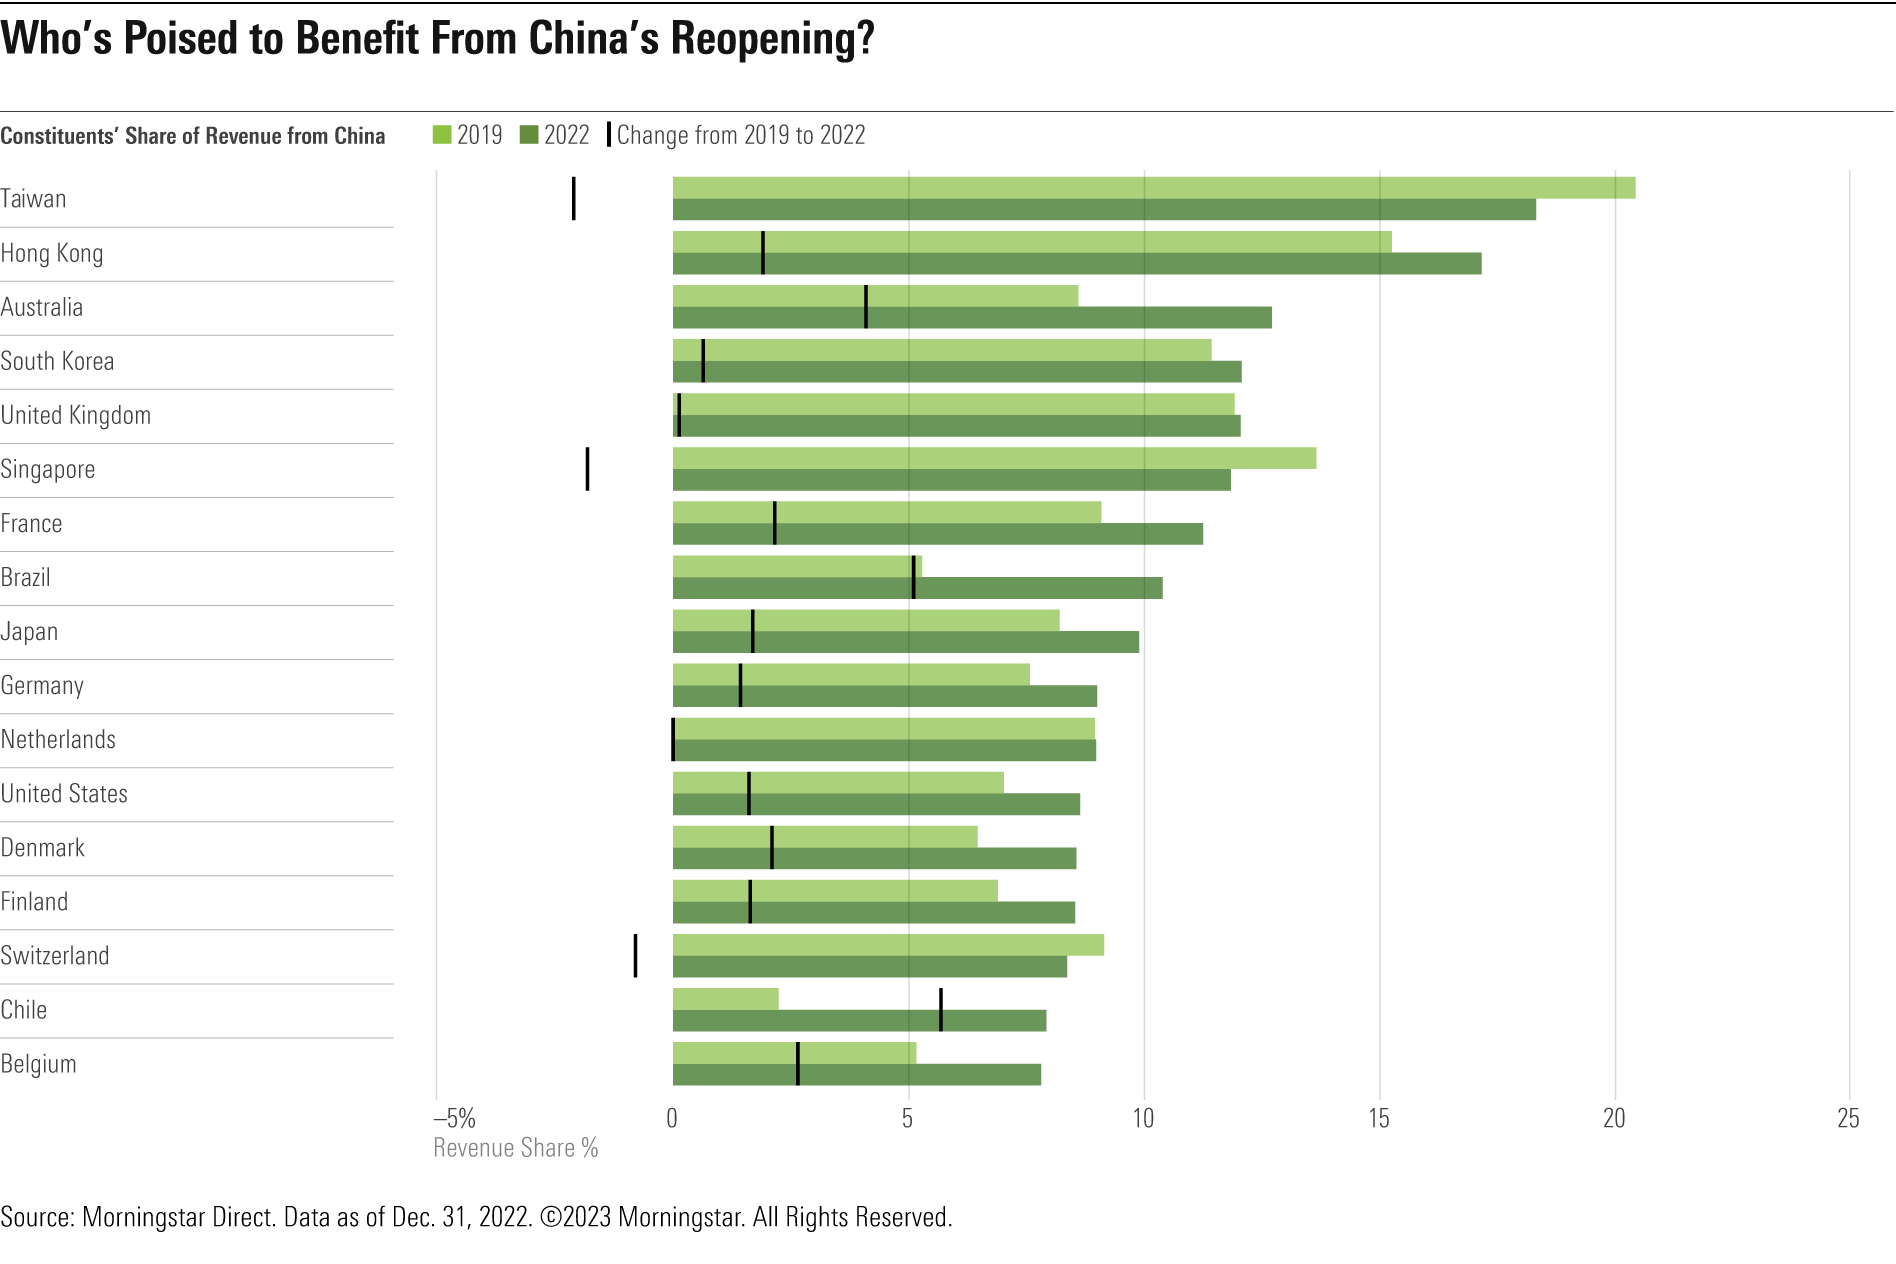 Bar chart of how the share of revenue of different country components falling in China has evolved between 2019 and 2022.